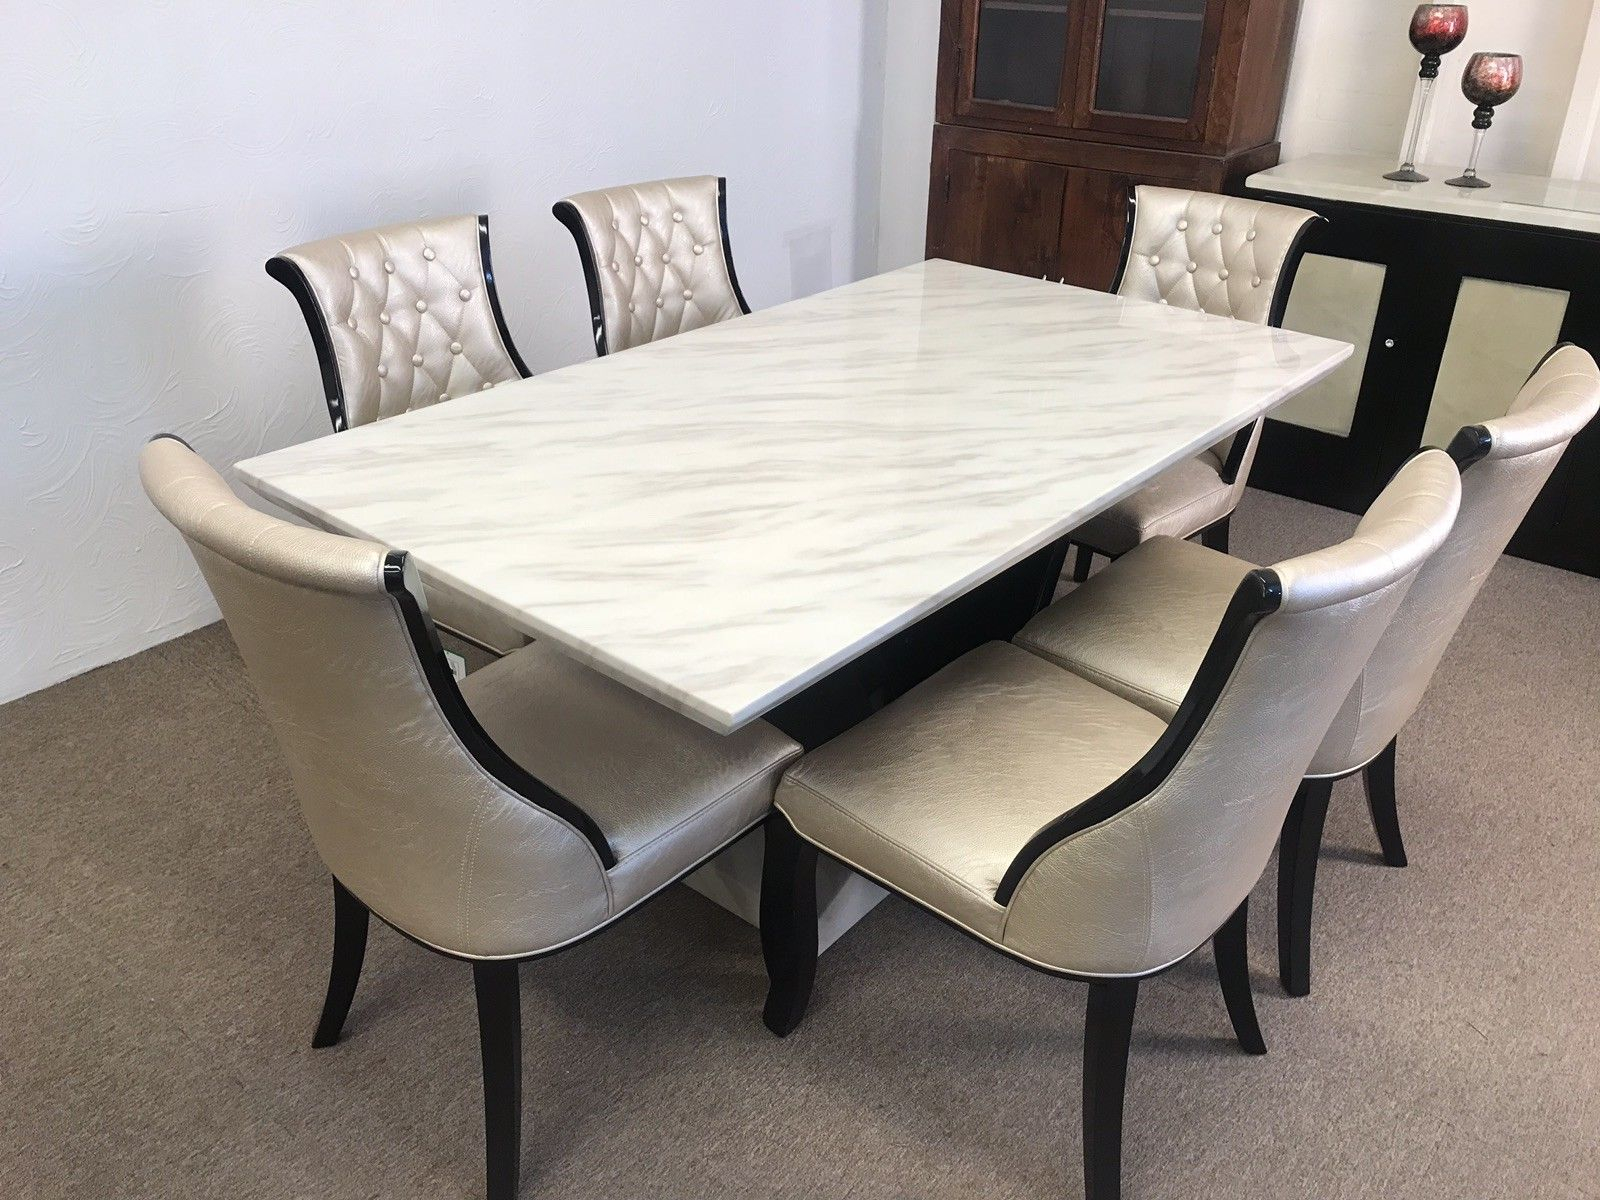  marble kitchen tables and chairs